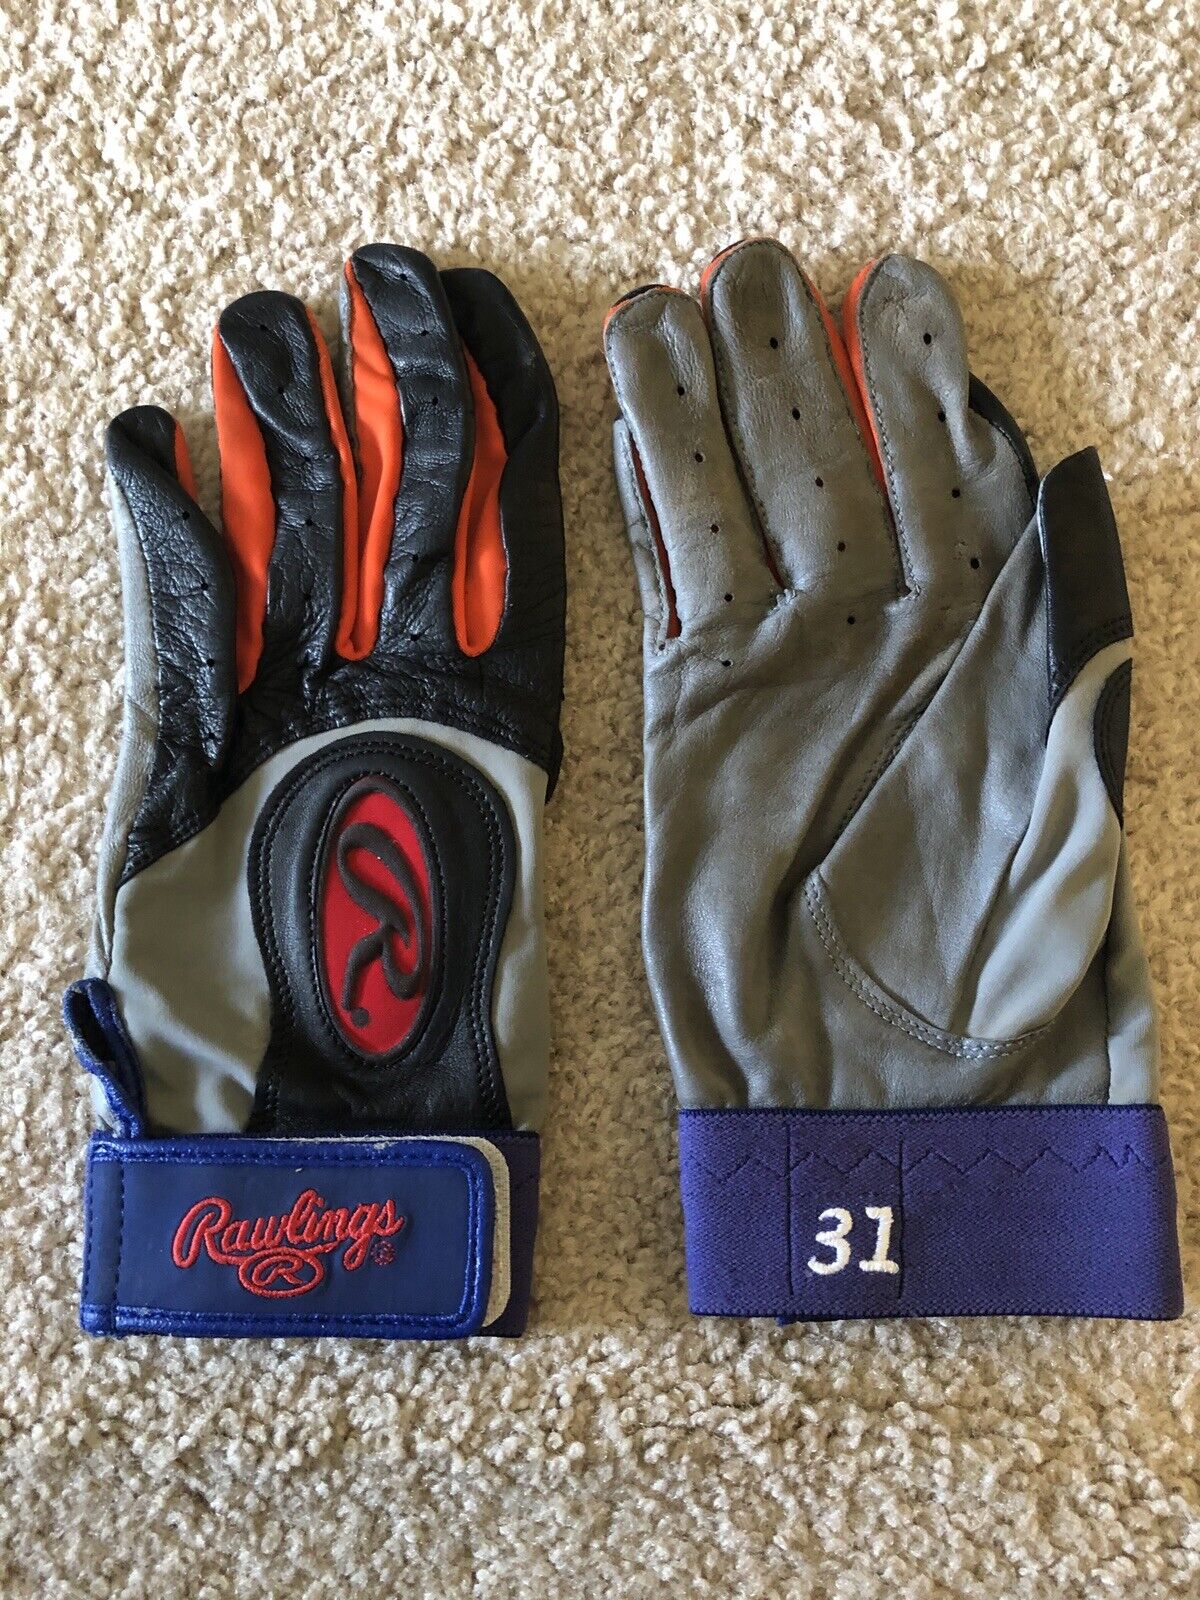 MIKE PIAZZA GAME USED BATTING GLOVES FROM HIS DAYS WITH THE METS